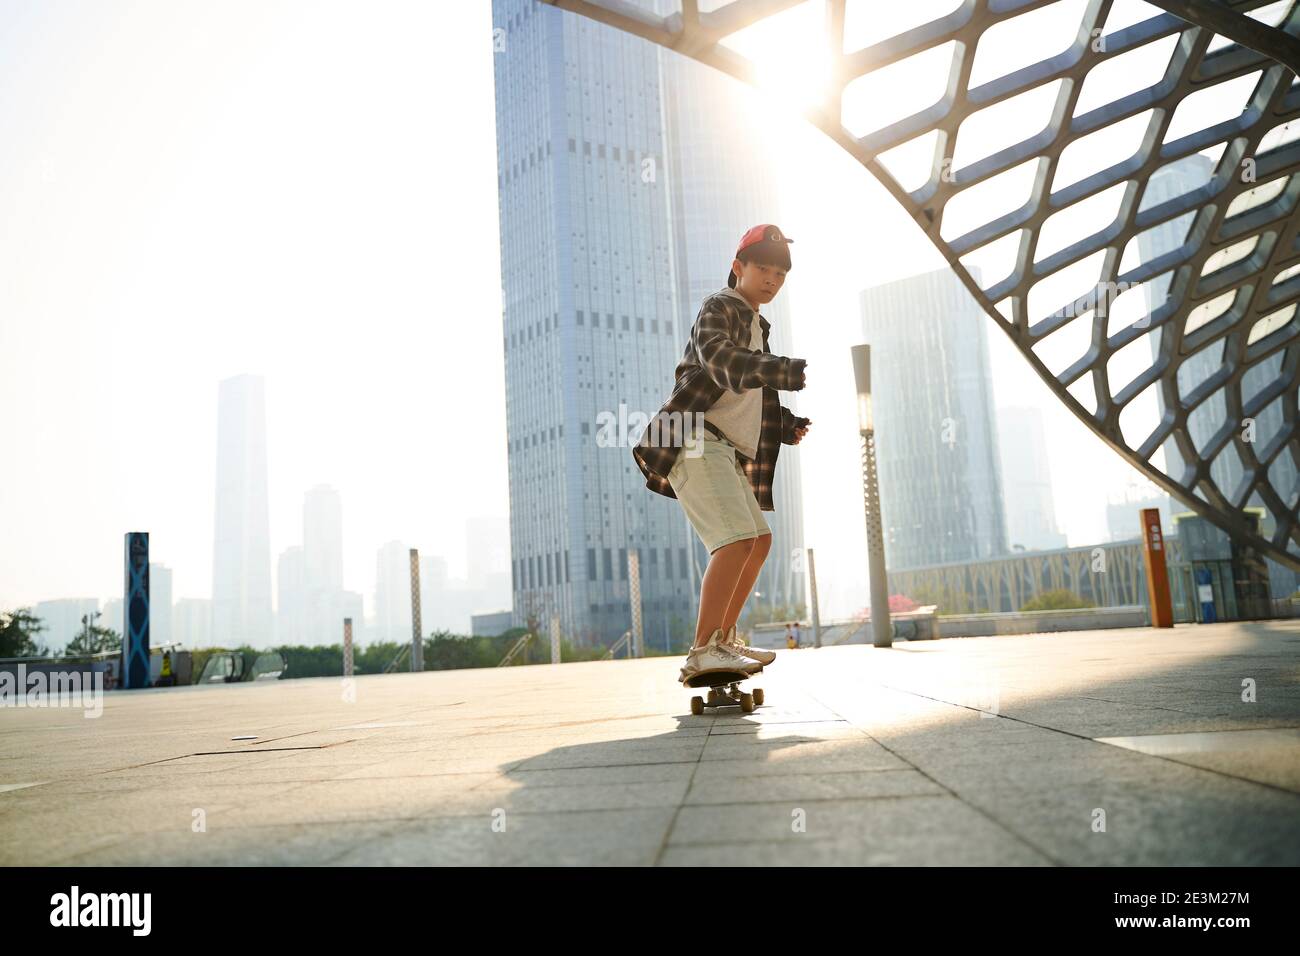 teenage asian child skateboarding outdoors on city square with modern building in background Stock Photo